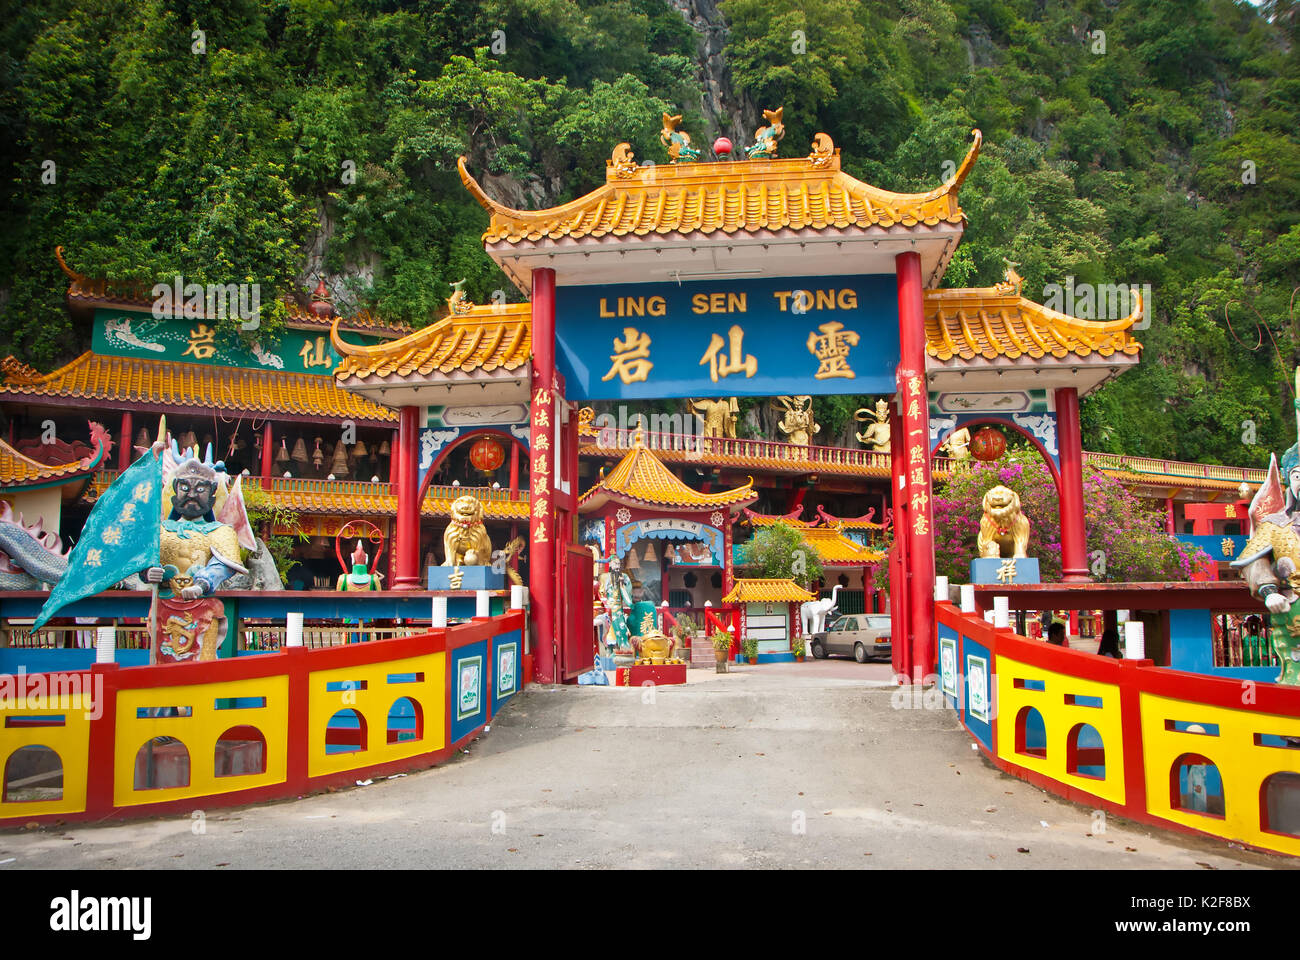 Ling Sen Tong, Temple cave, Ipoh - Ling Sen Tong is a beautiful Taoist cave temple located at the foot of a limestone hill in Ipoh, Perak. Stock Photo